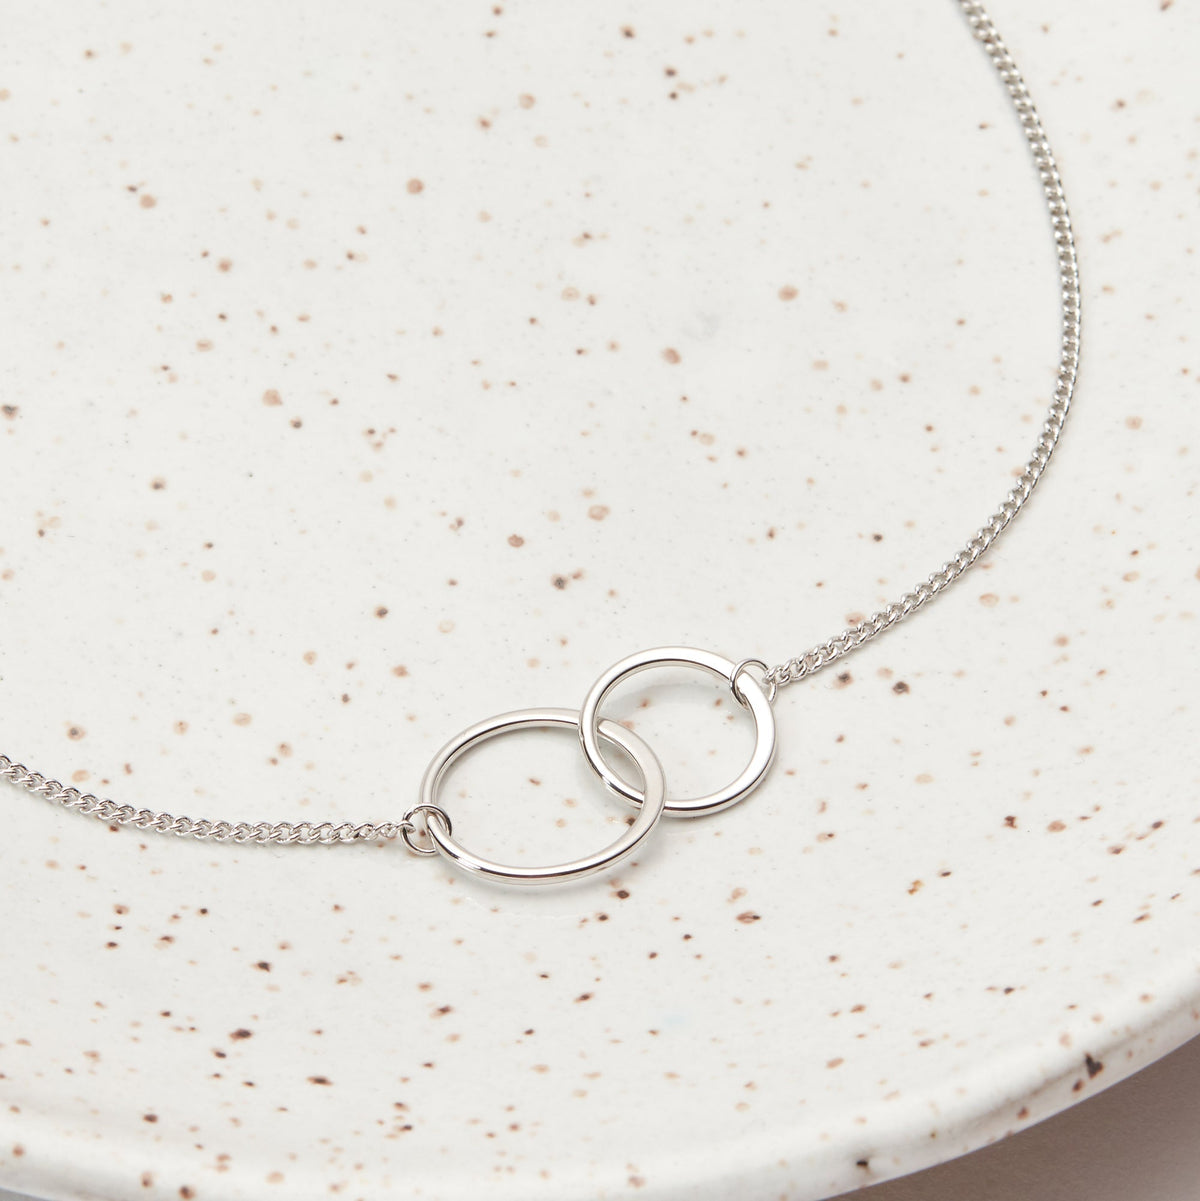 Gifts for Women with Cancer, Multiple Styles Necklace